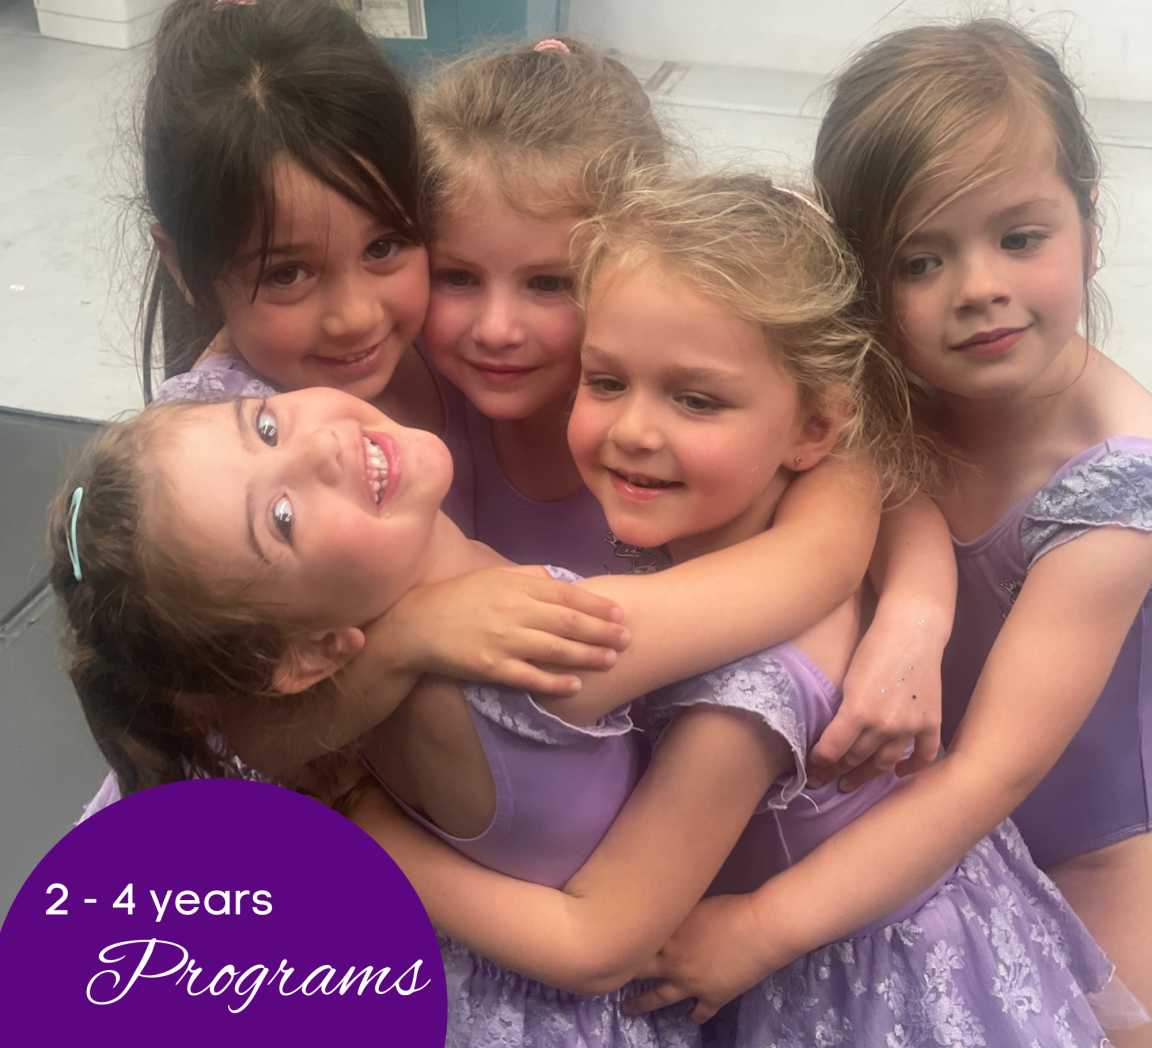 Kids aged 2-4 in dance classes at Simone's School of Performing Arts in Berkeley Vale, smiling and with arms around each other, enjoying preschool dance programs